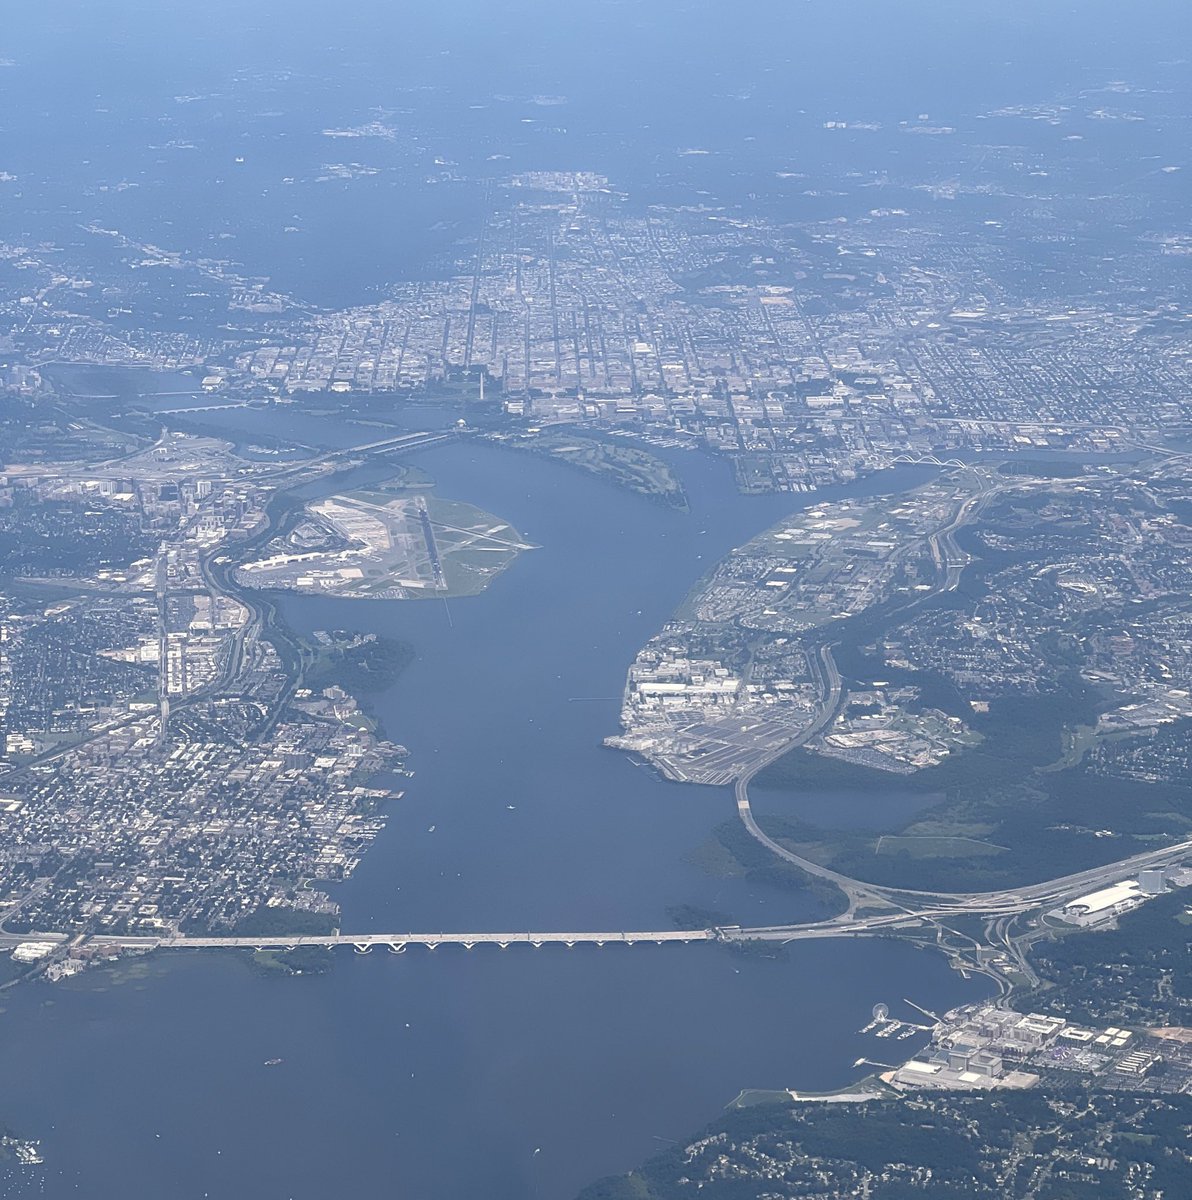 Never done this flight path before. ✈️ Dallas-BWI with this AWESOME view of DC. Wilson Bridge (I-95/495) in the foreground.